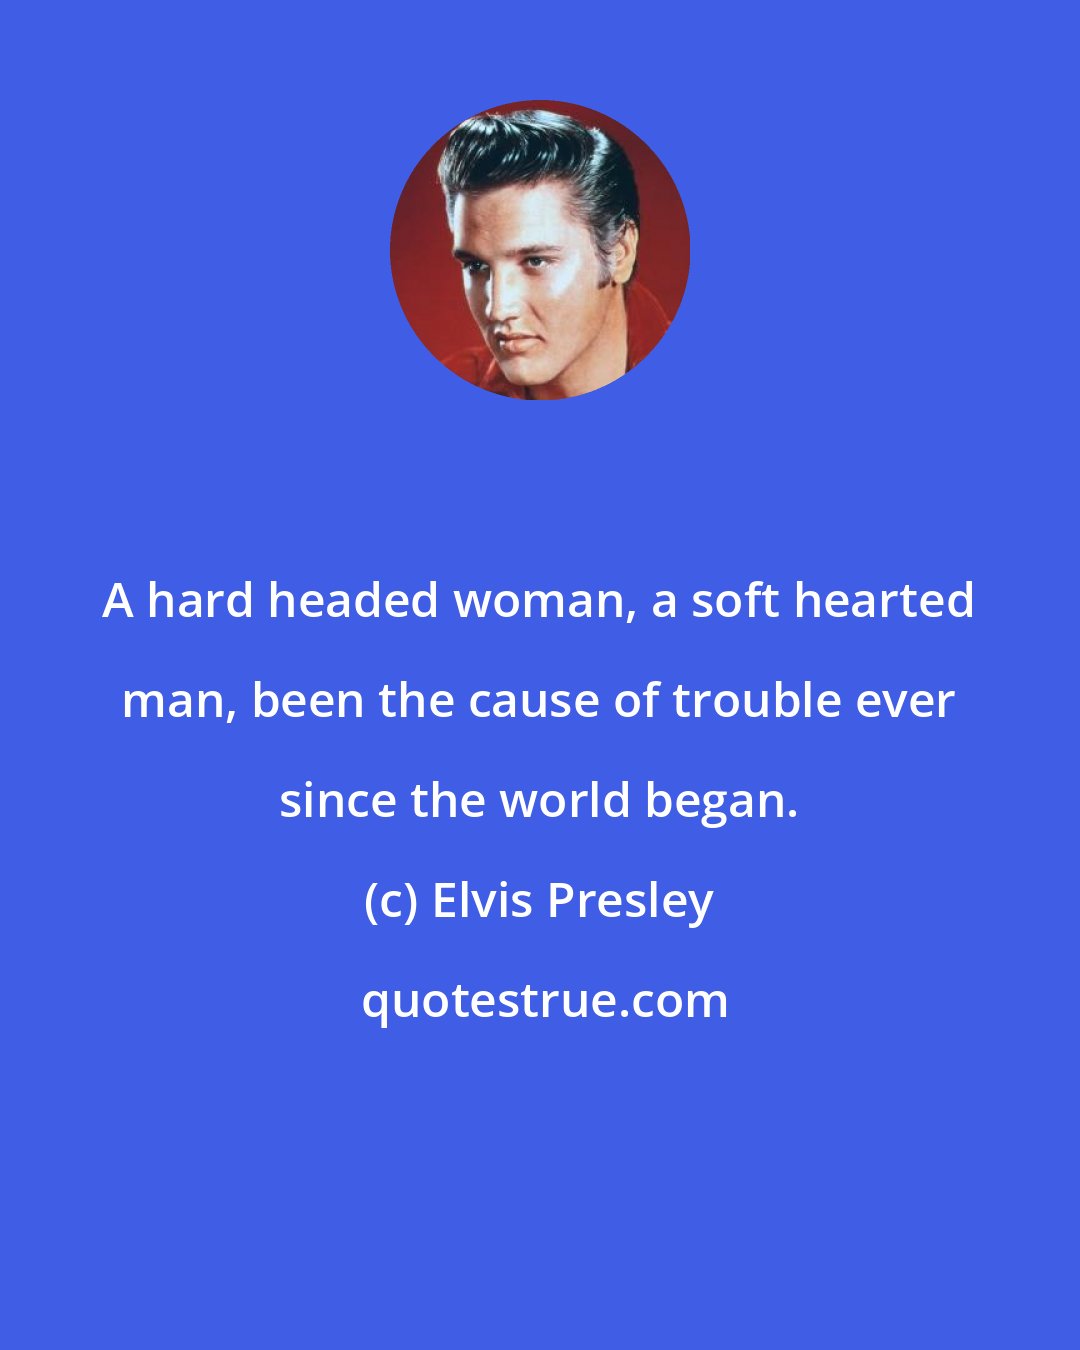 Elvis Presley: A hard headed woman, a soft hearted man, been the cause of trouble ever since the world began.